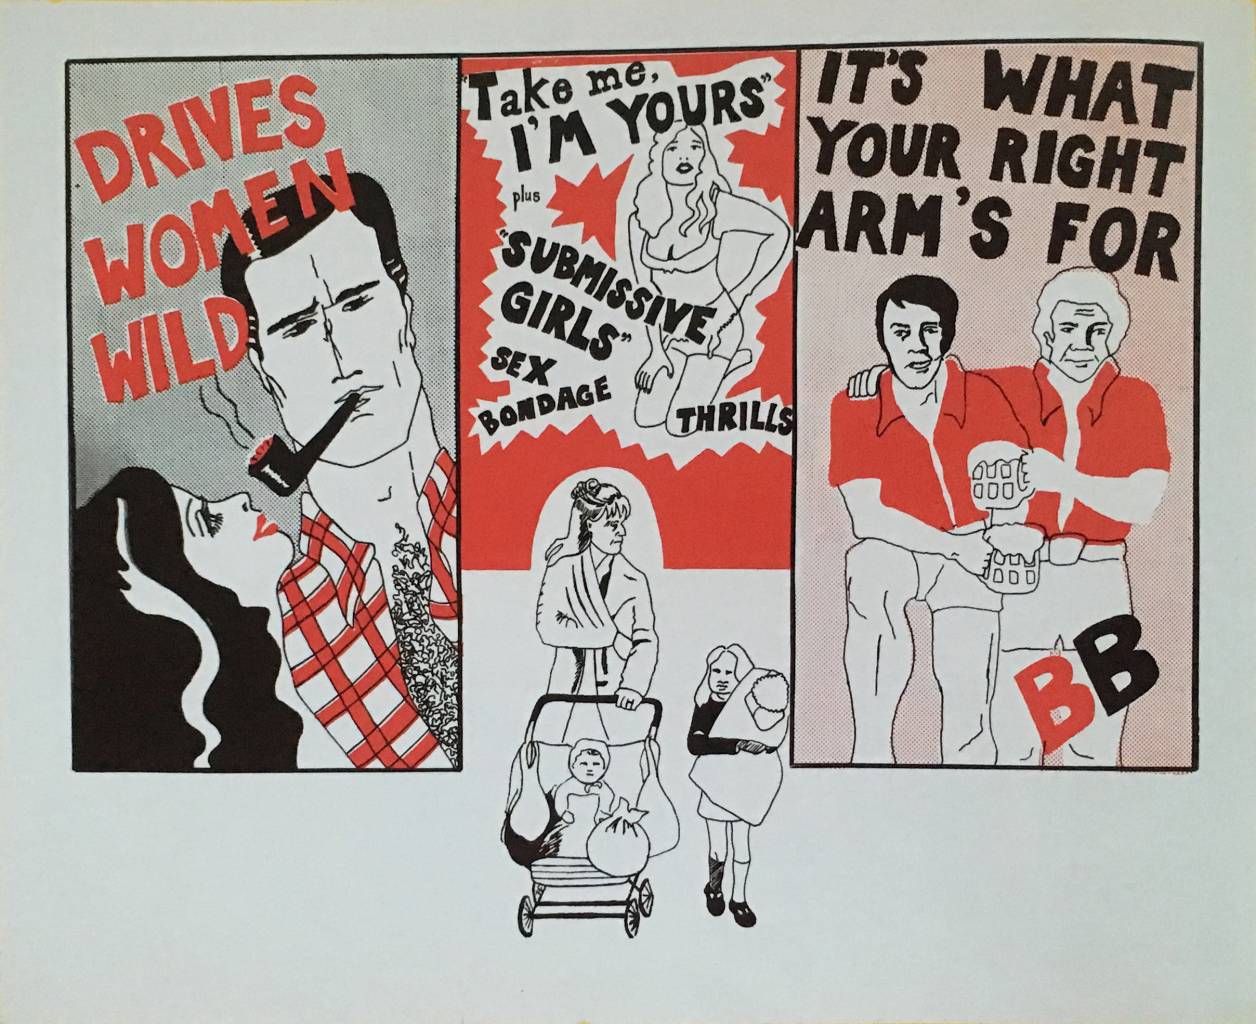 It's What Your Right Arm's For, 1977